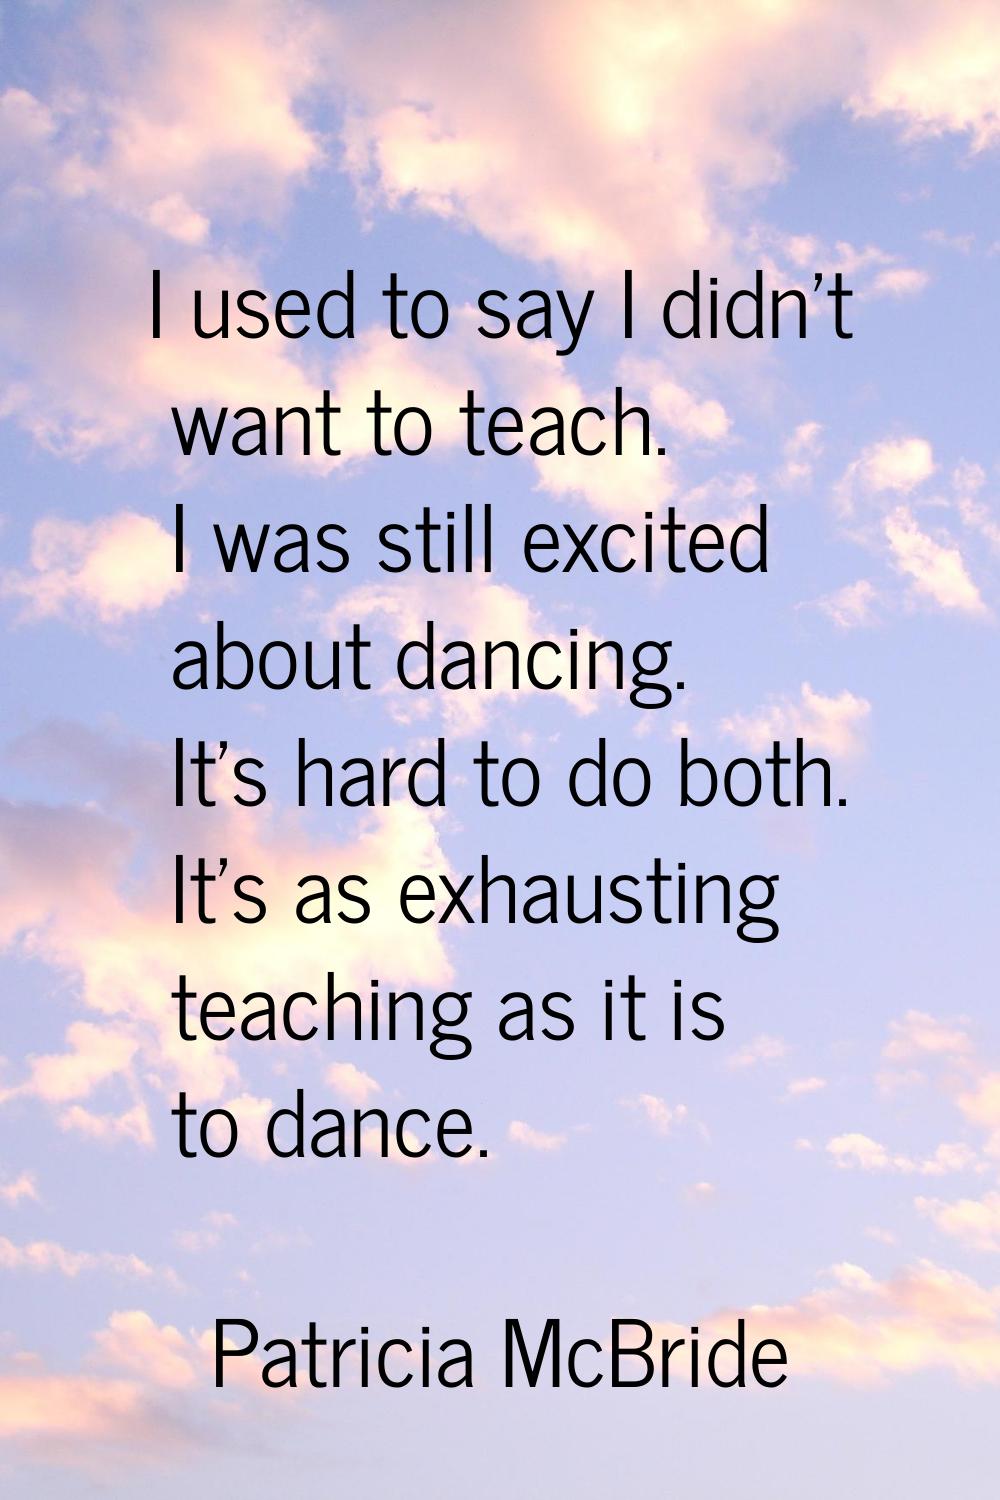 I used to say I didn't want to teach. I was still excited about dancing. It's hard to do both. It's